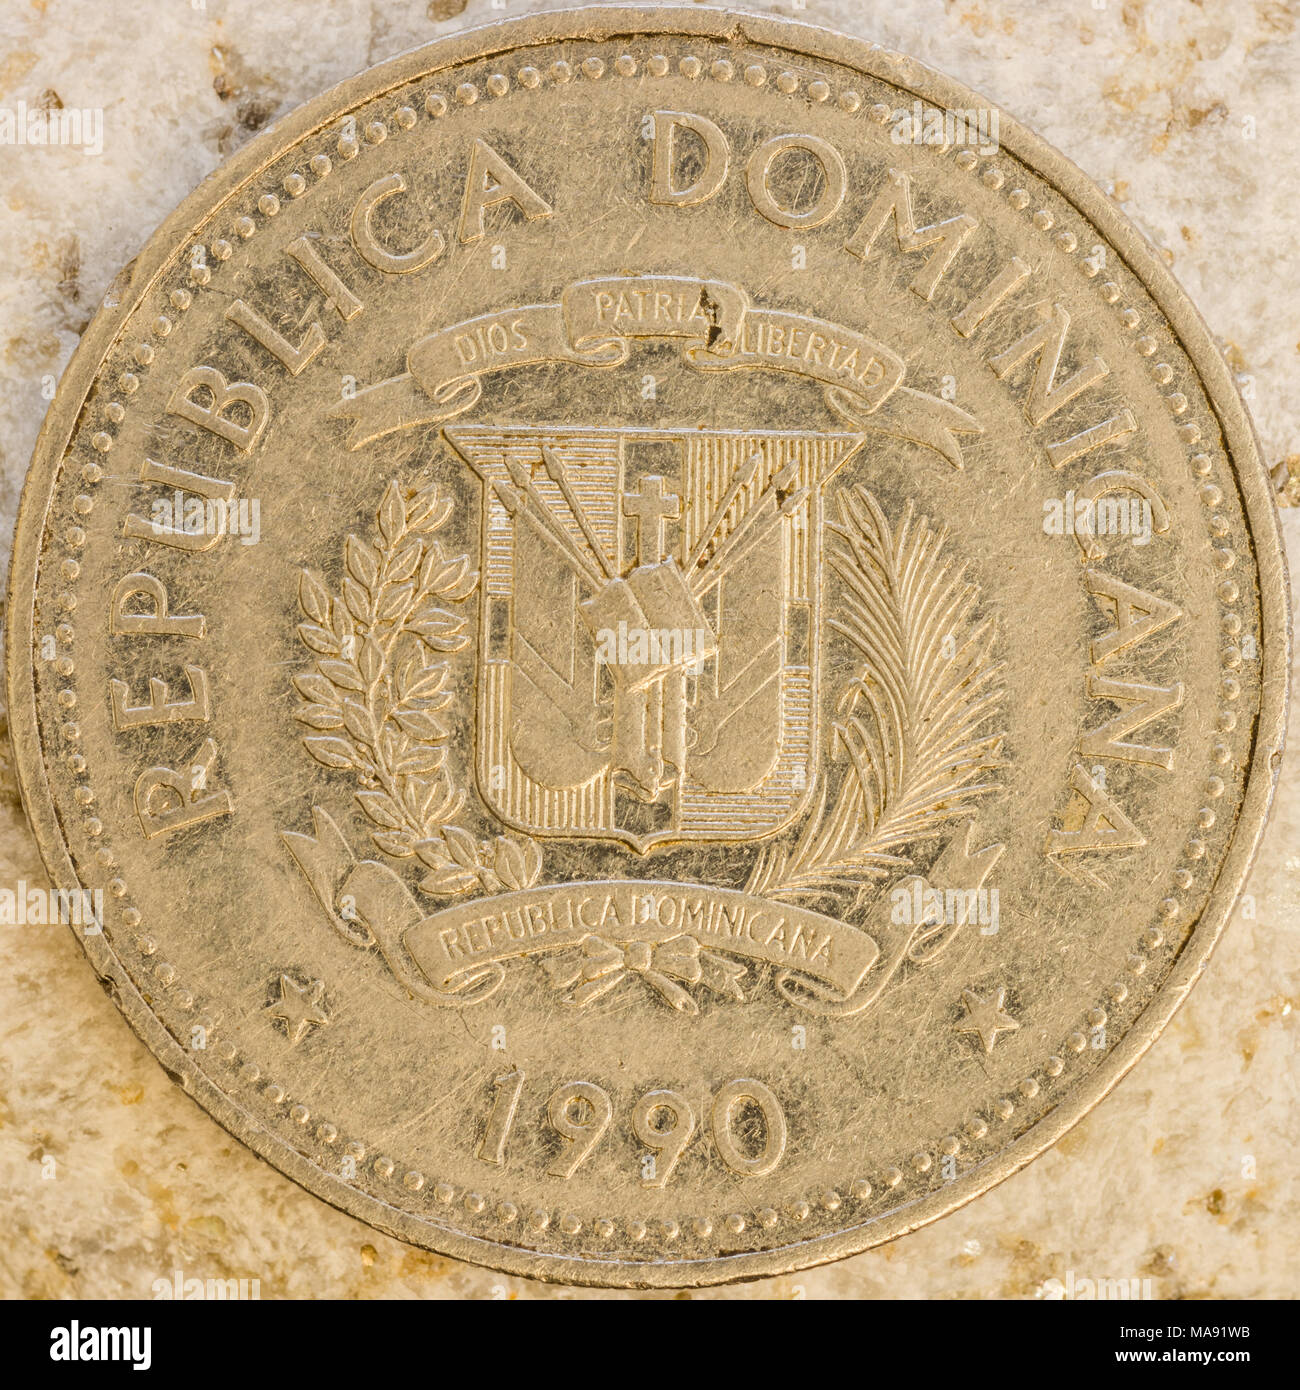 Close up view of aged vintage coin showing fine detail on coin engravings Stock Photo